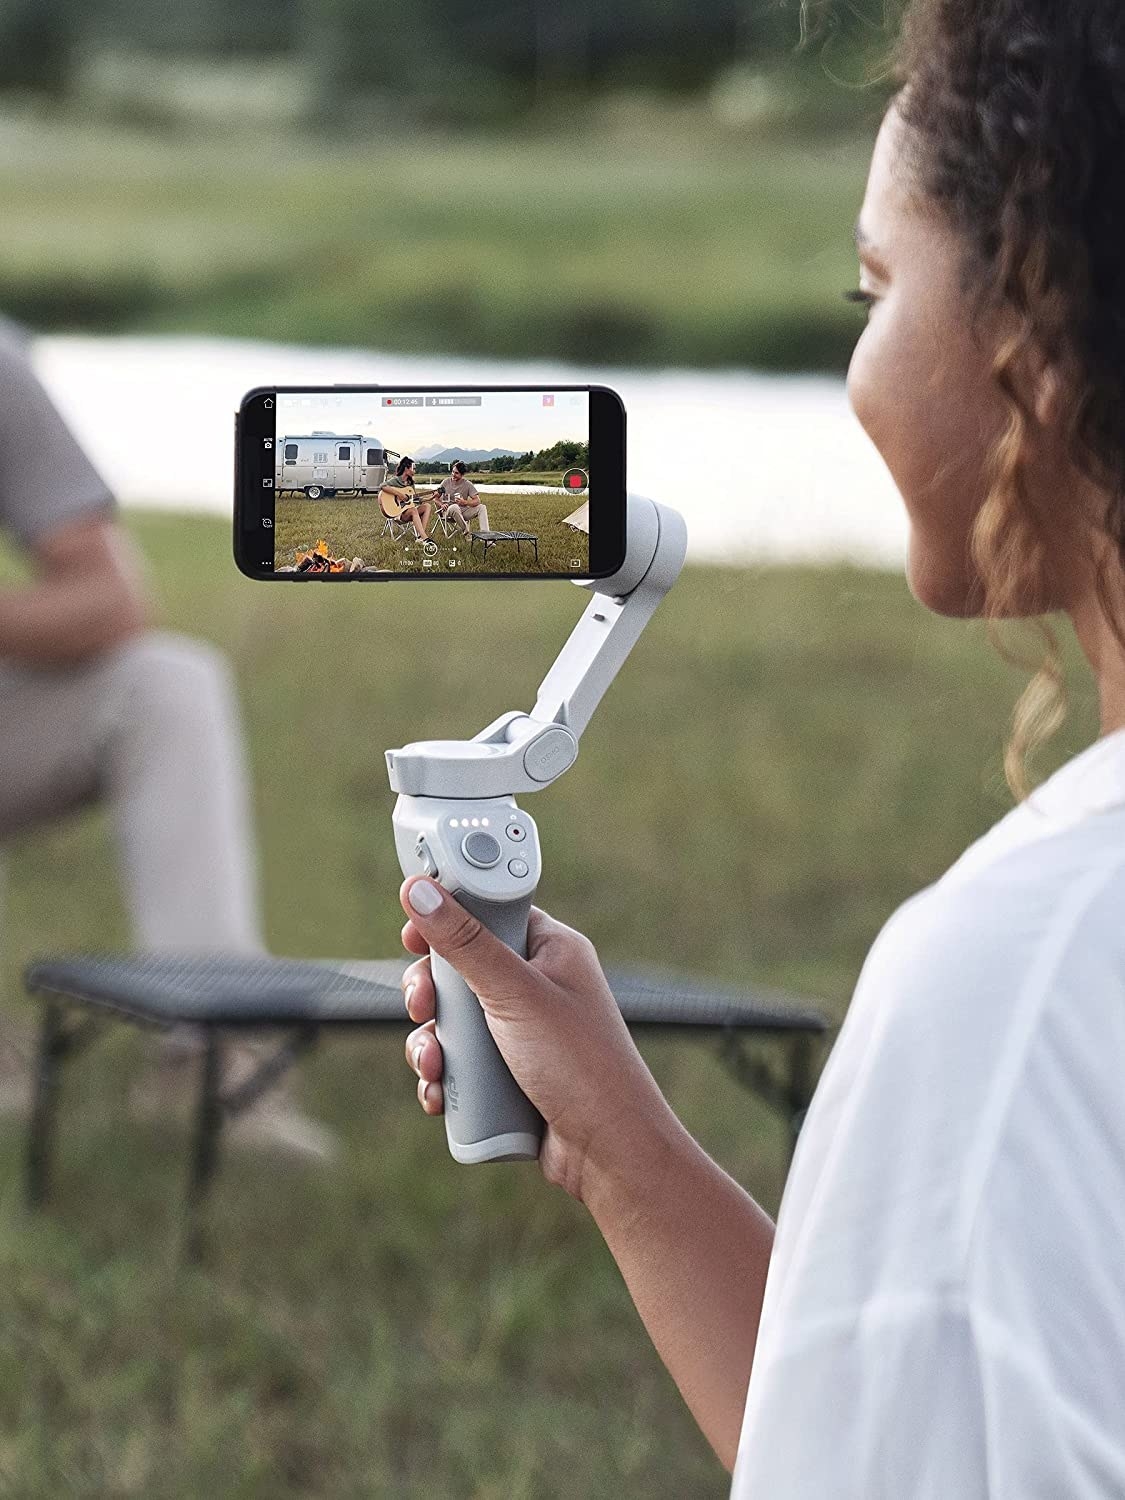 A person using the self-stabilizing tripod while filming a video on their phone